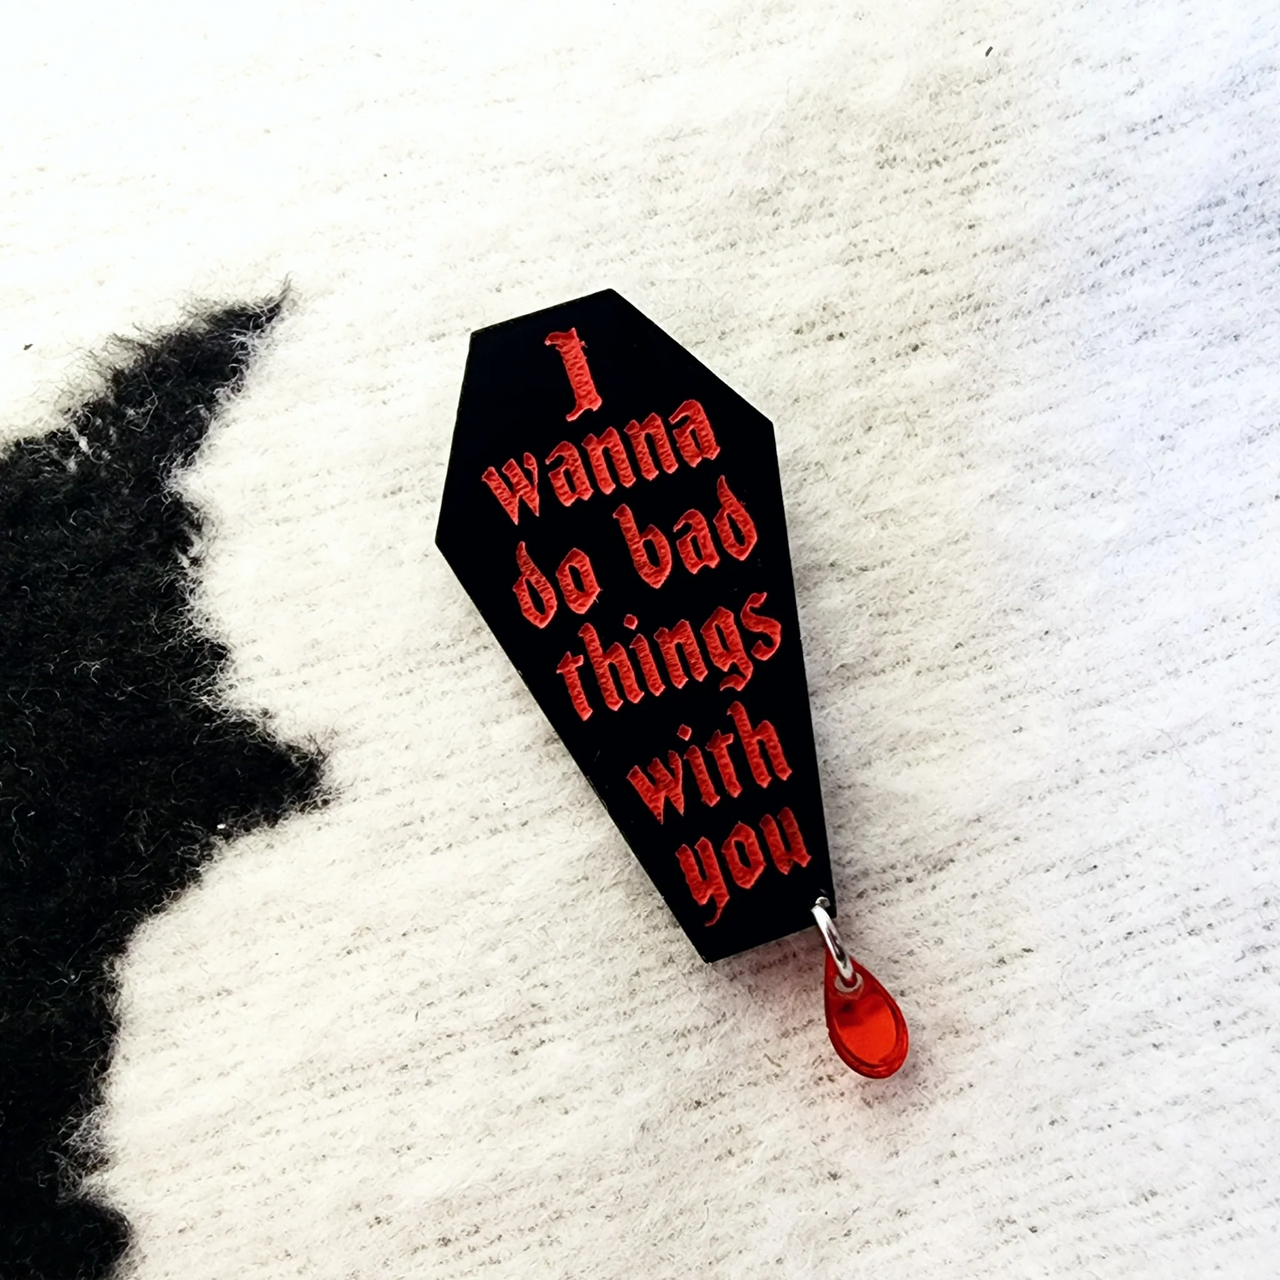 MALA BAD THINGS WITH YOU COFFIN ACRYLIC BROOCH